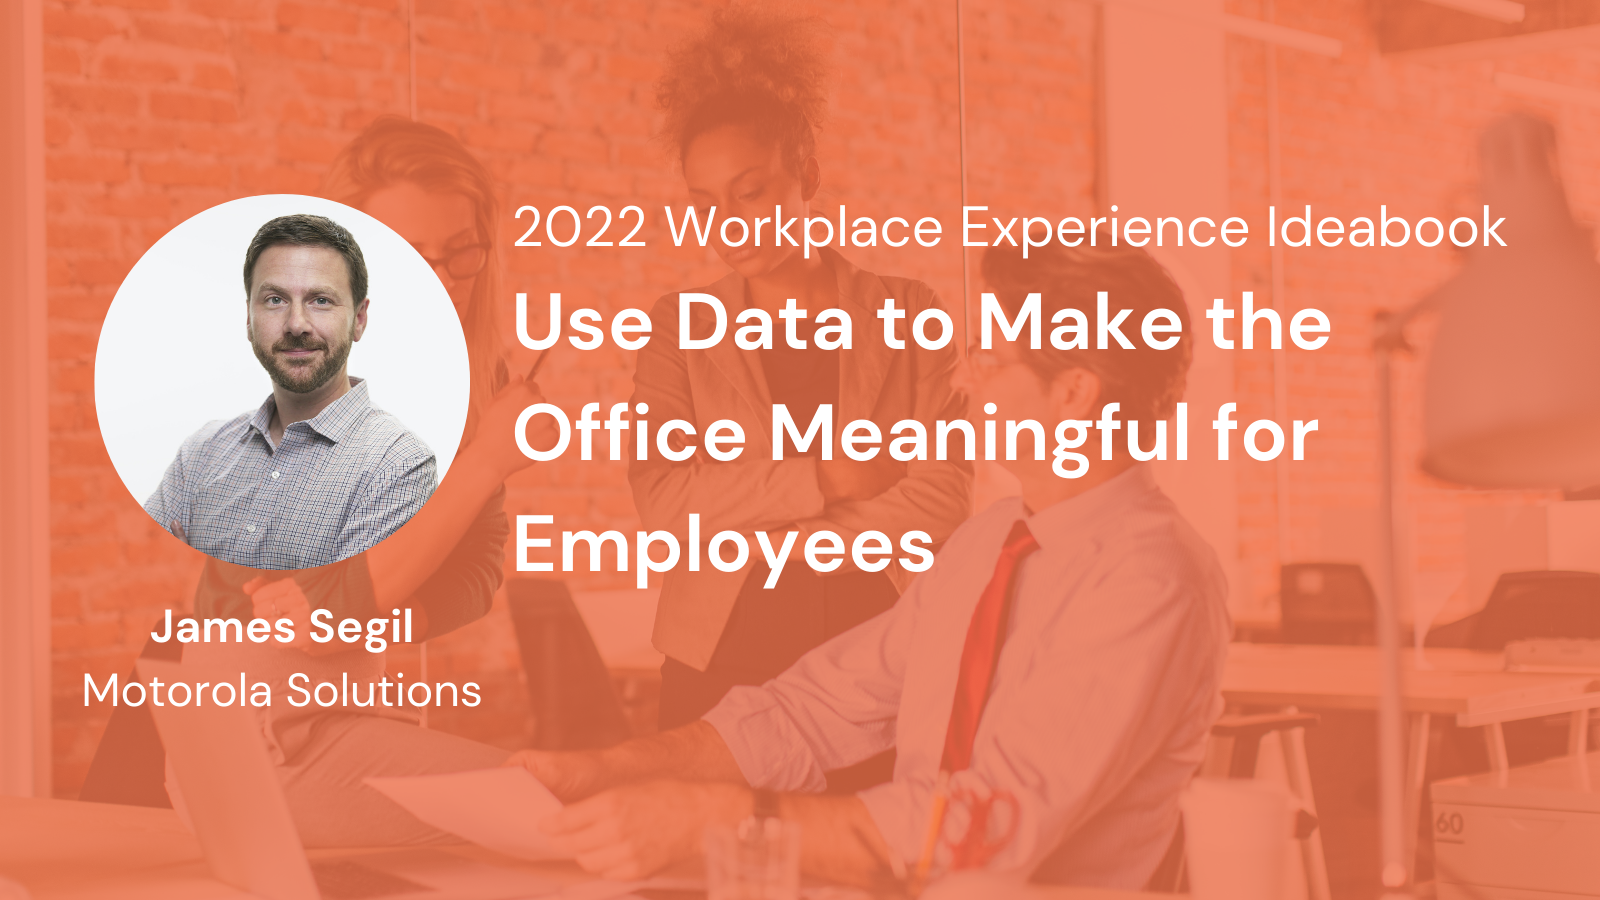 Use Data to Make the Office Meaningful for Employees